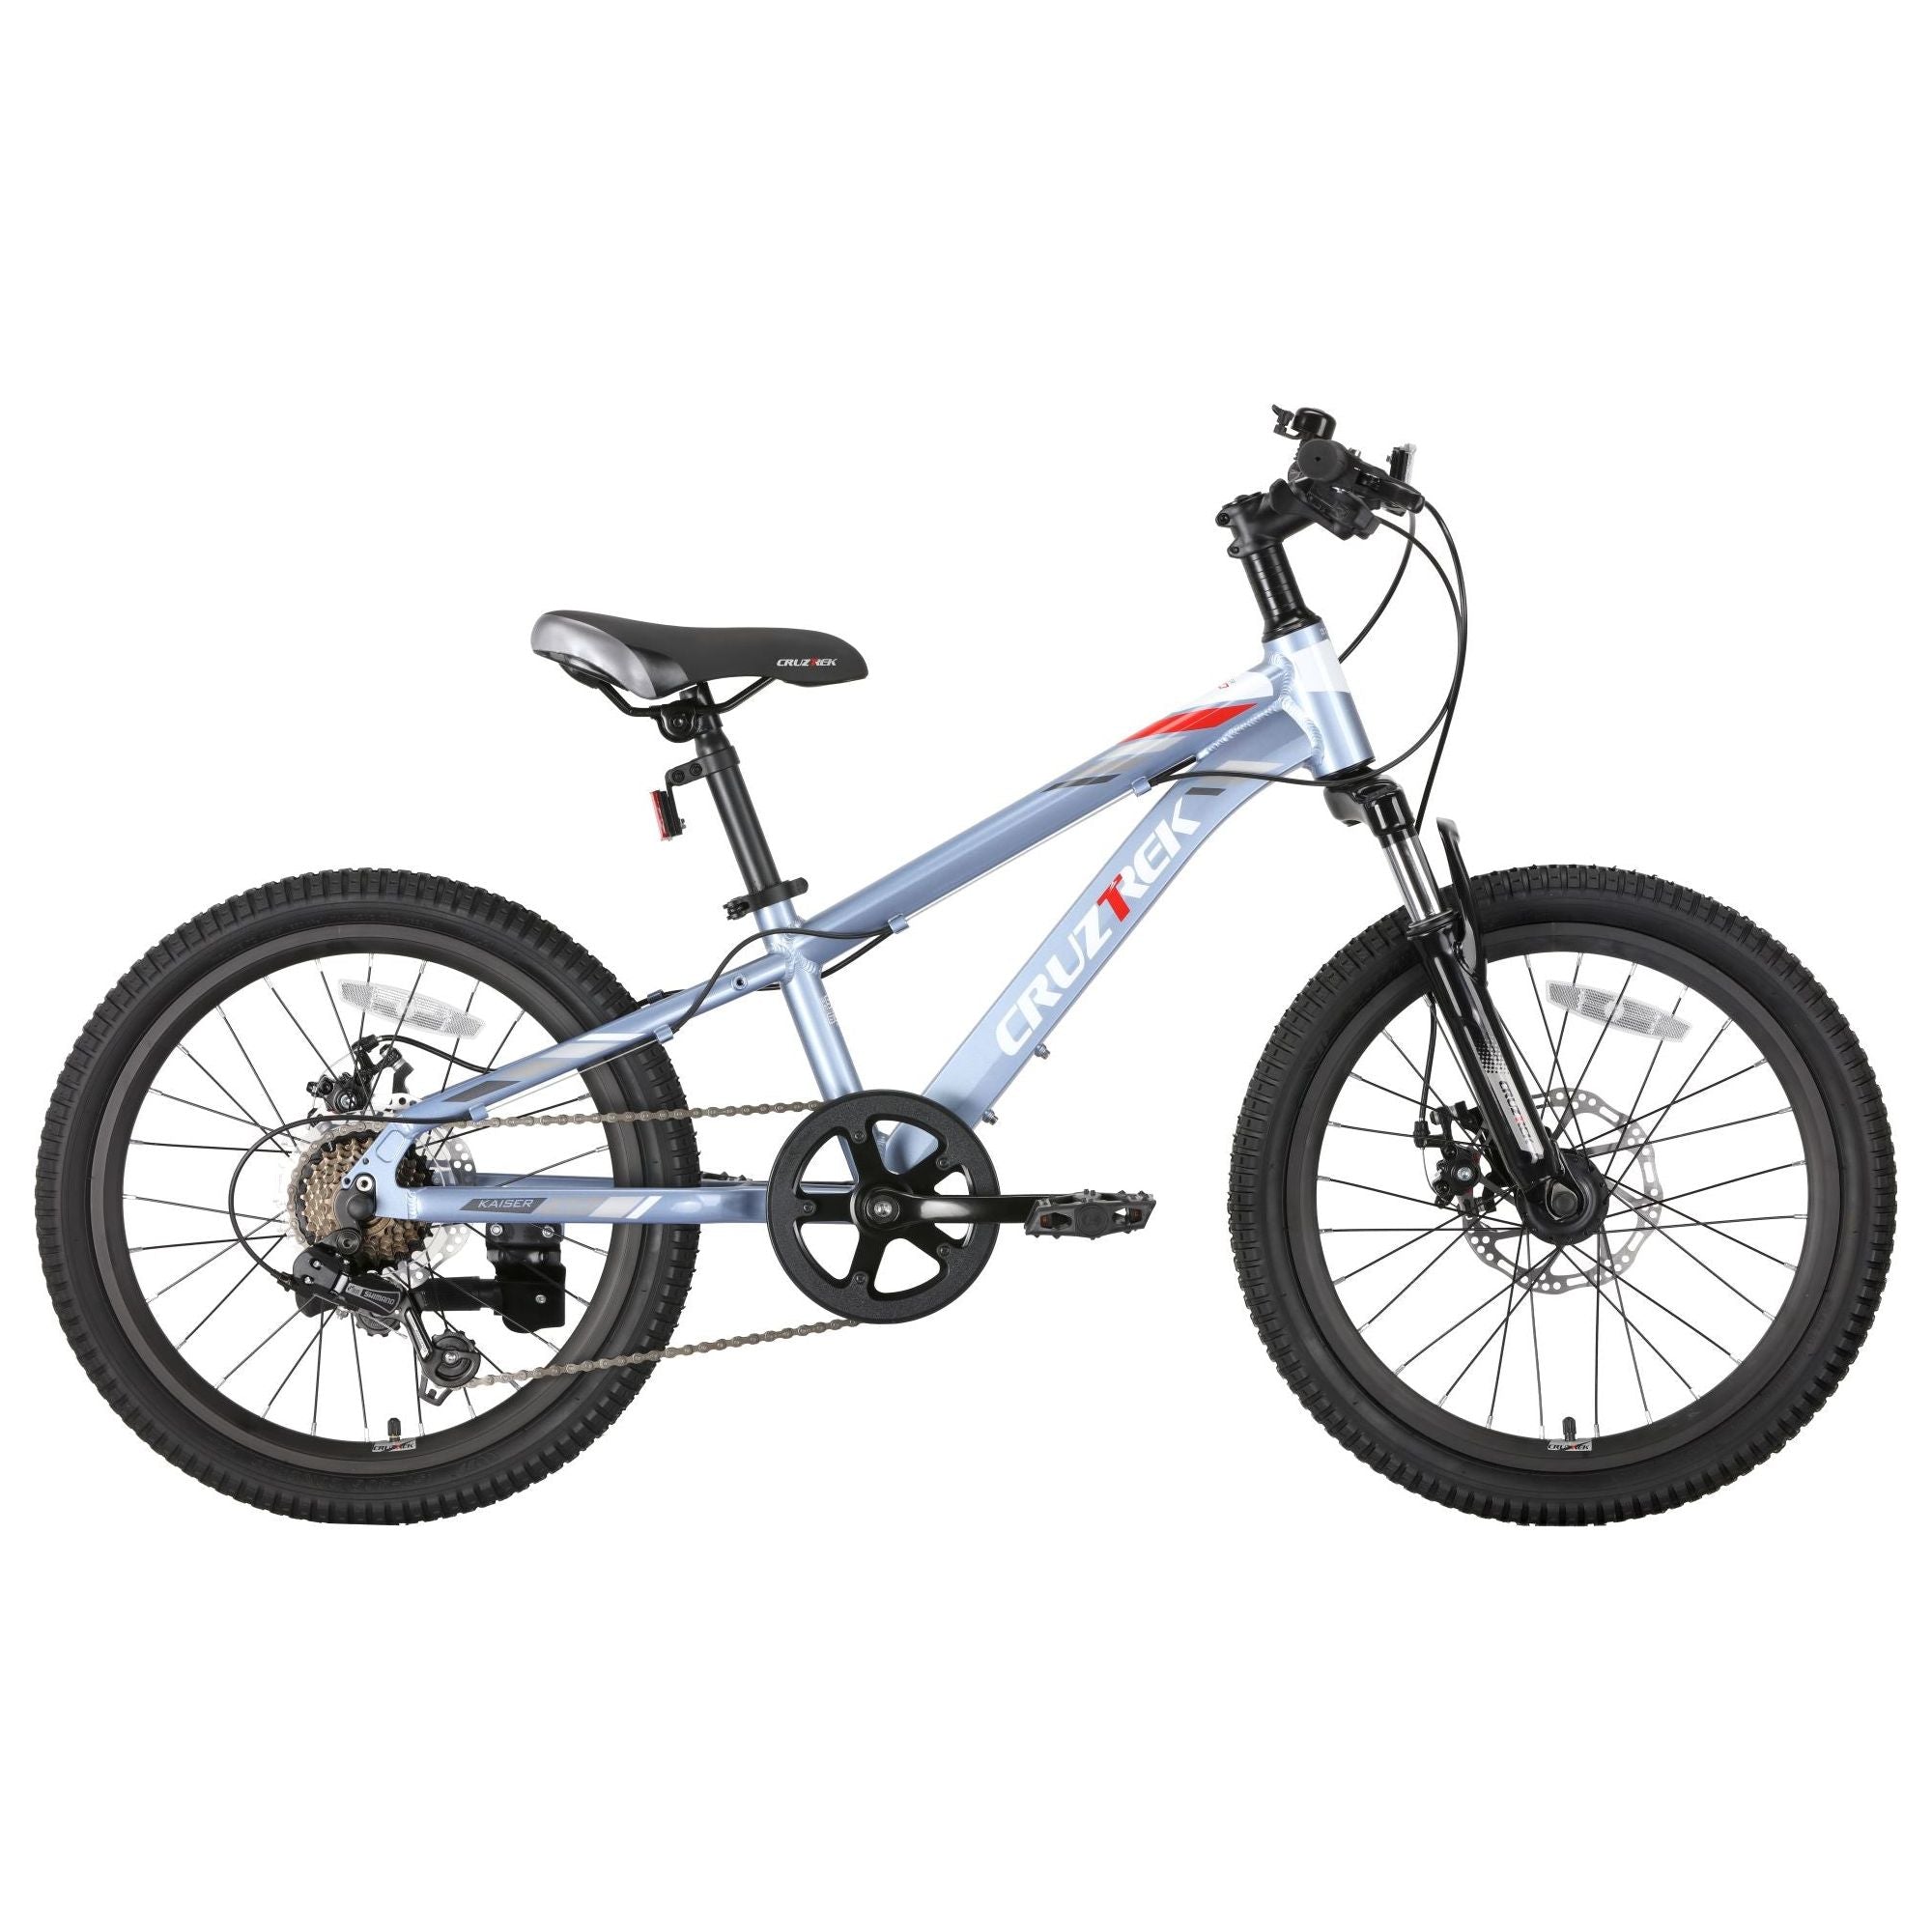 CRUZTREK 6061 Aluminum Alloy Special-Shaped Tubes Junior Bike Frame Size 20 with Gear and Disc Age- 7 Years to 11 Years